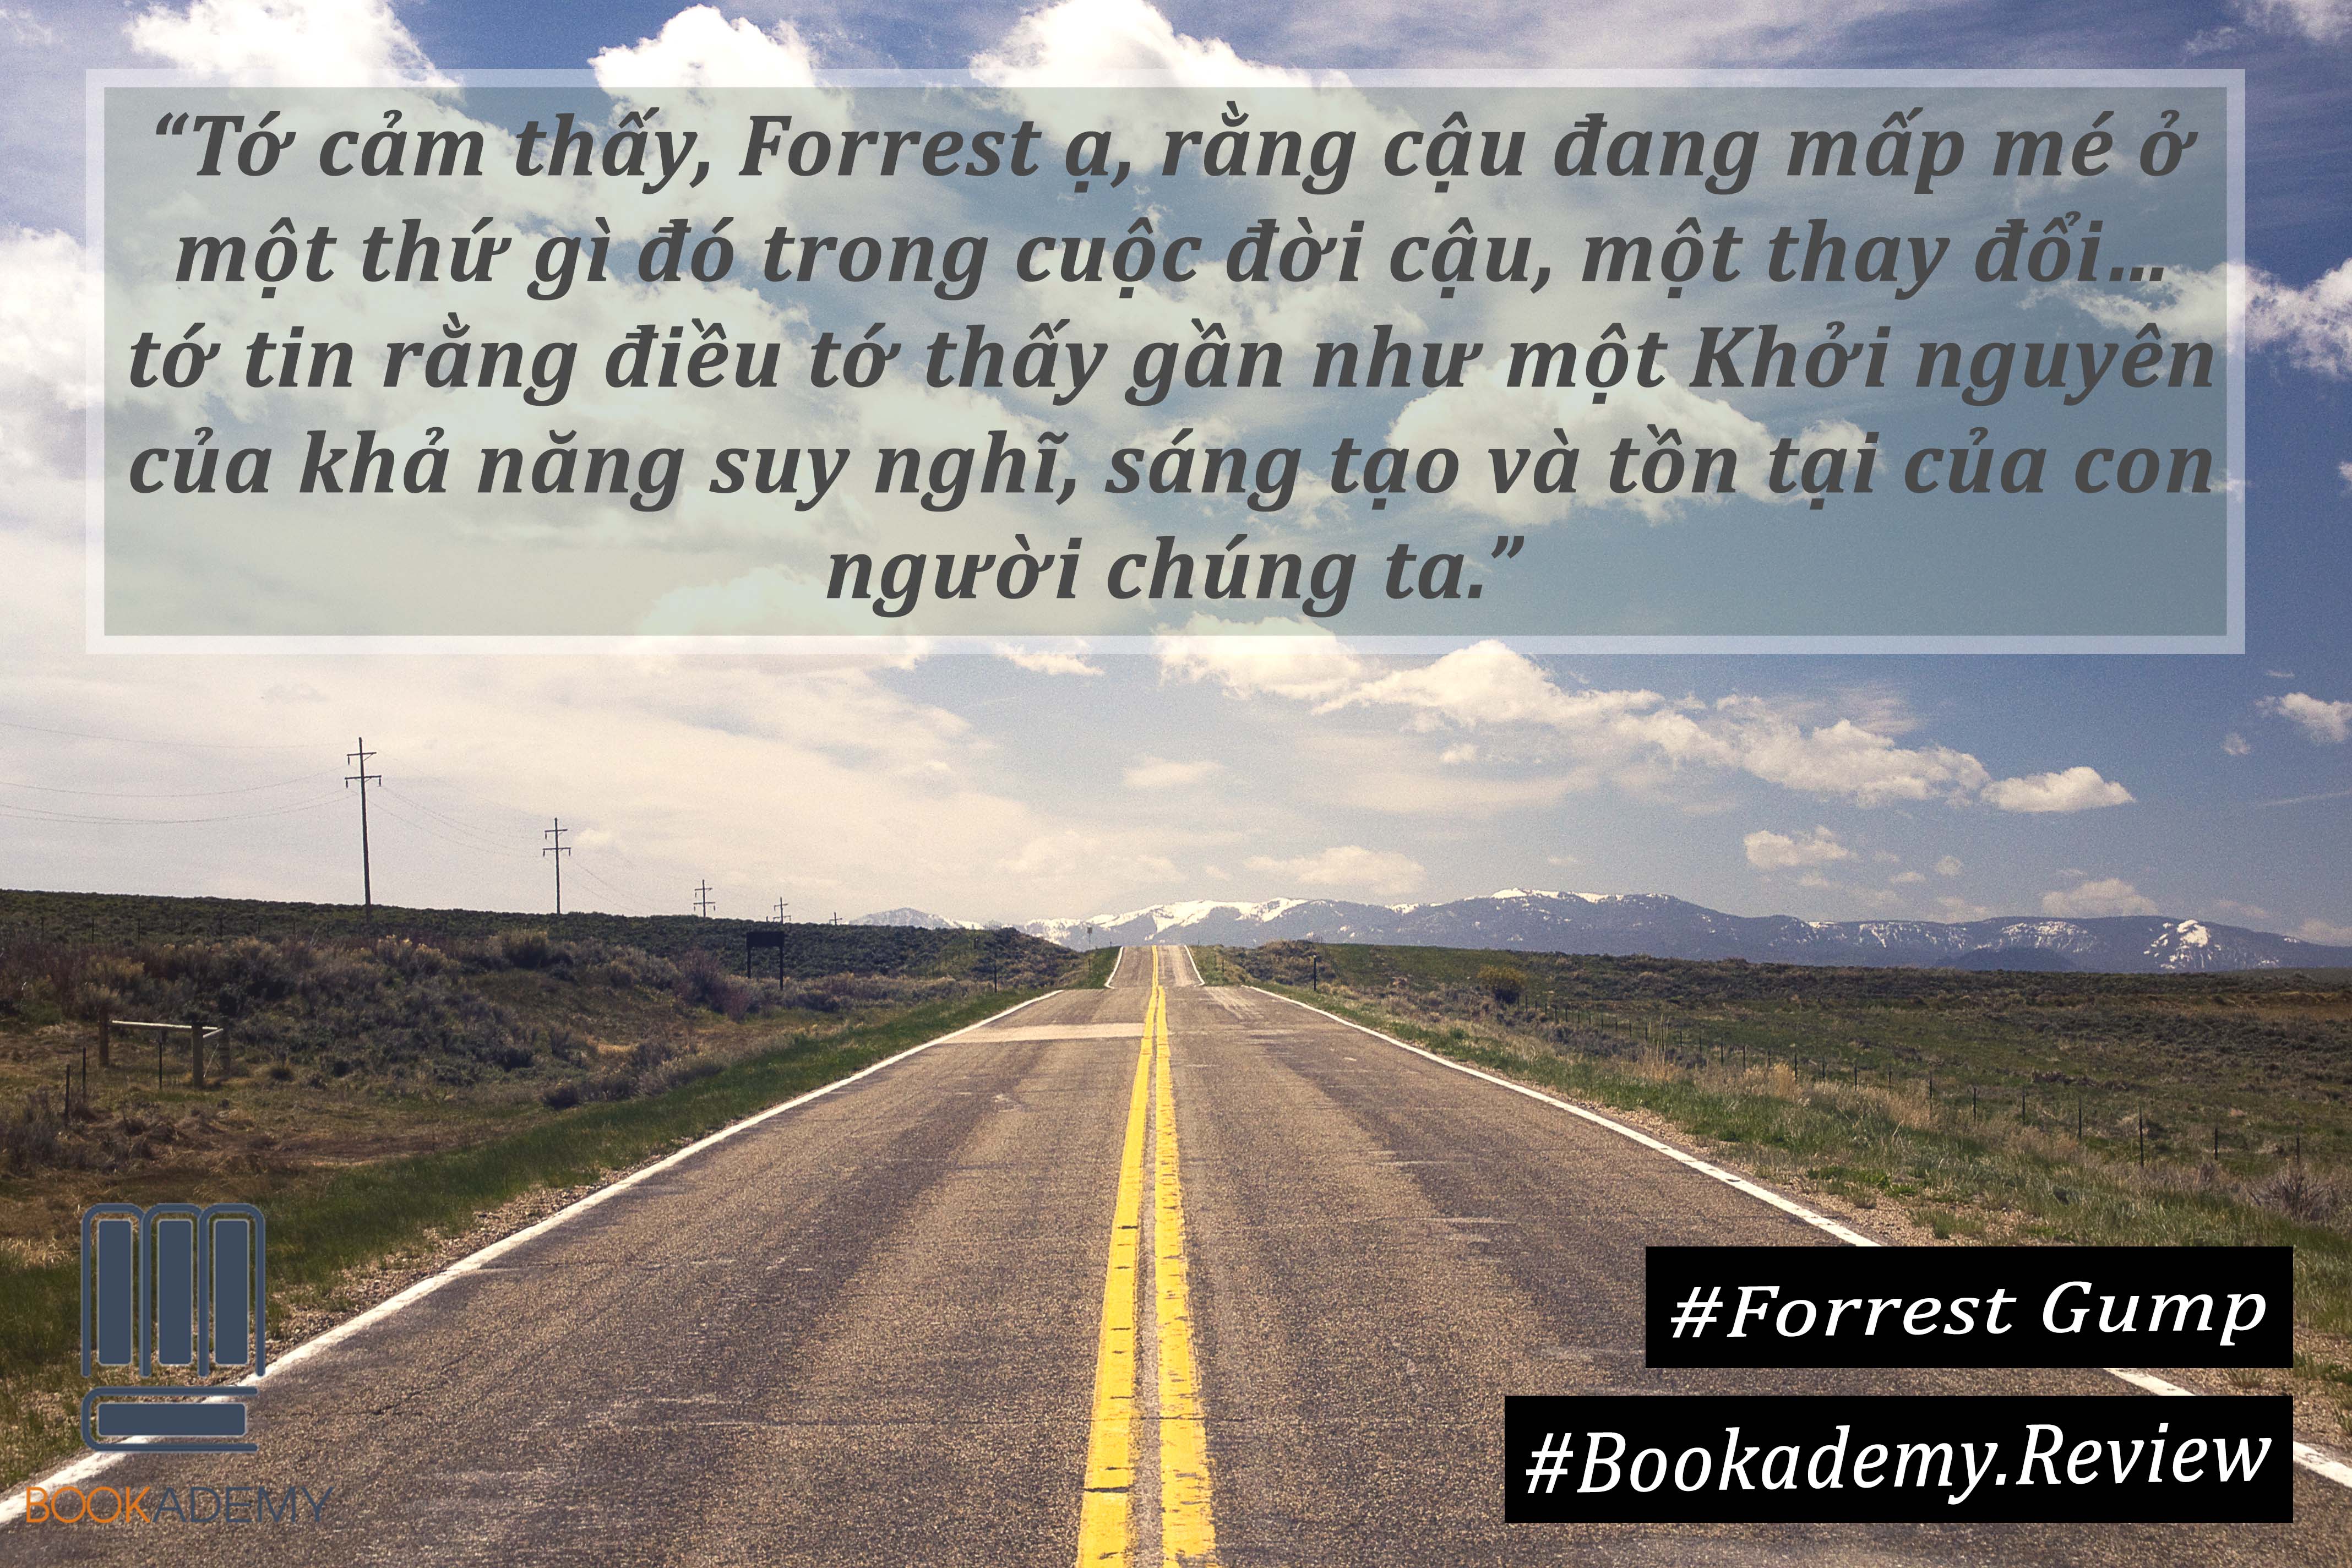 188af0f0 2b70 11e8 acaa 56c566ee3692 [Bookademy] Review Sách &quotForrest Gump&quot: Anh Hùng Hay Phản Anh Hùng - YBOX